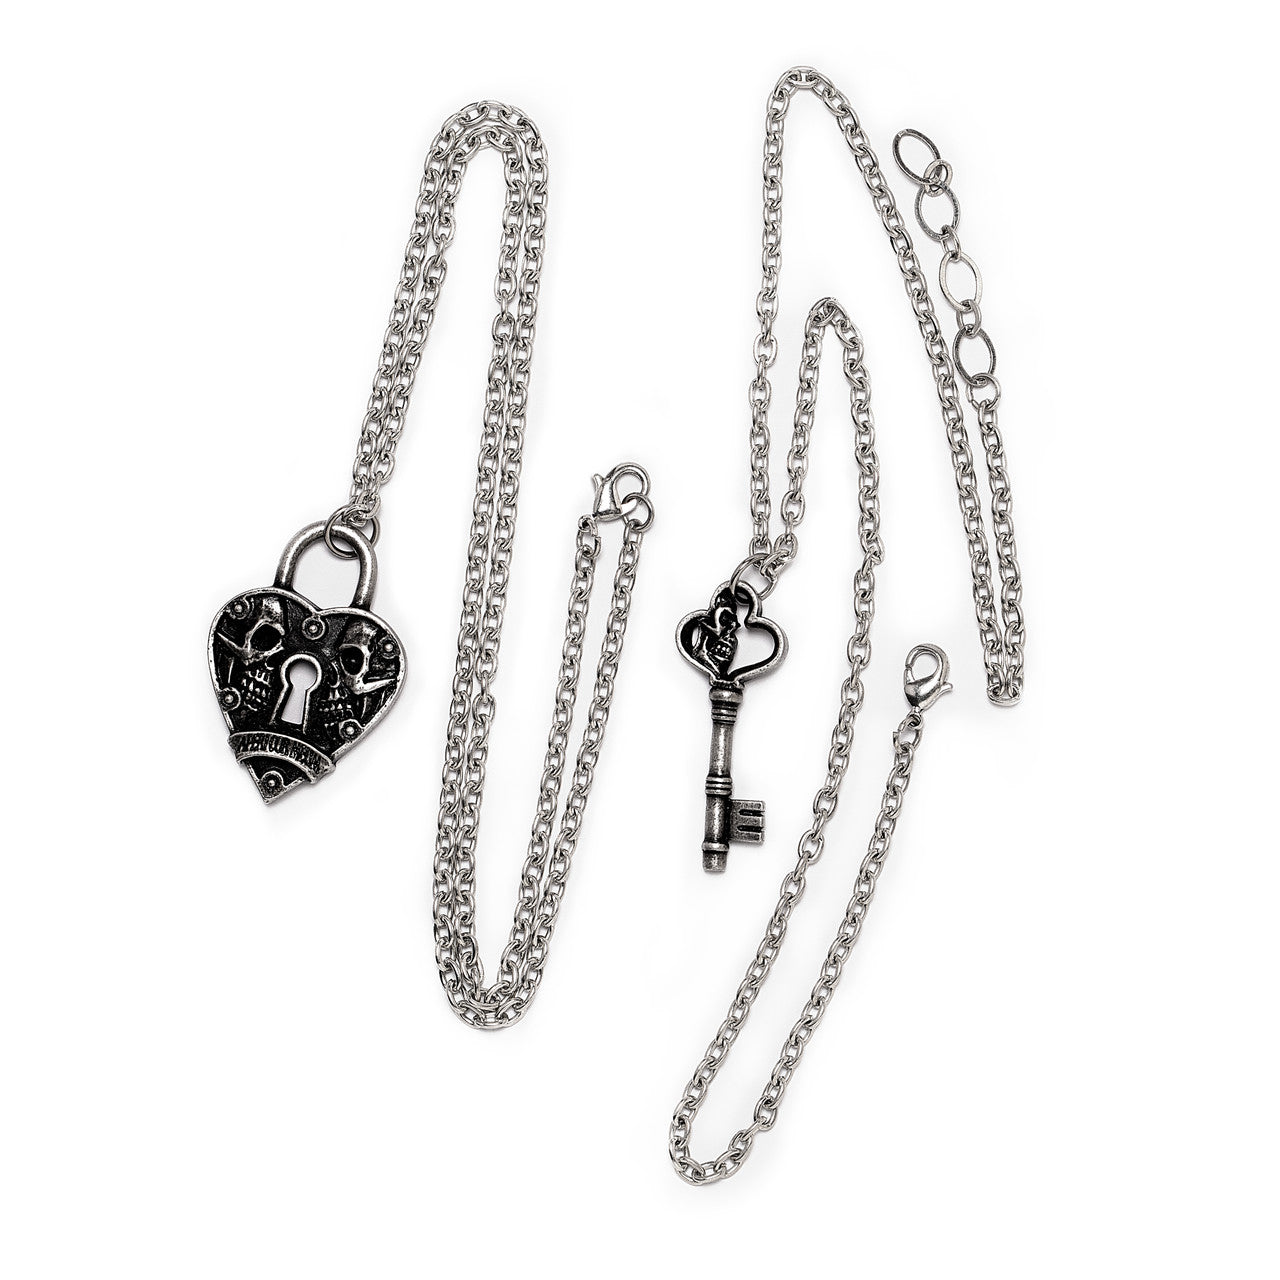 Key To Eternity Couples Pendant Necklaces by Alchemy Gothic